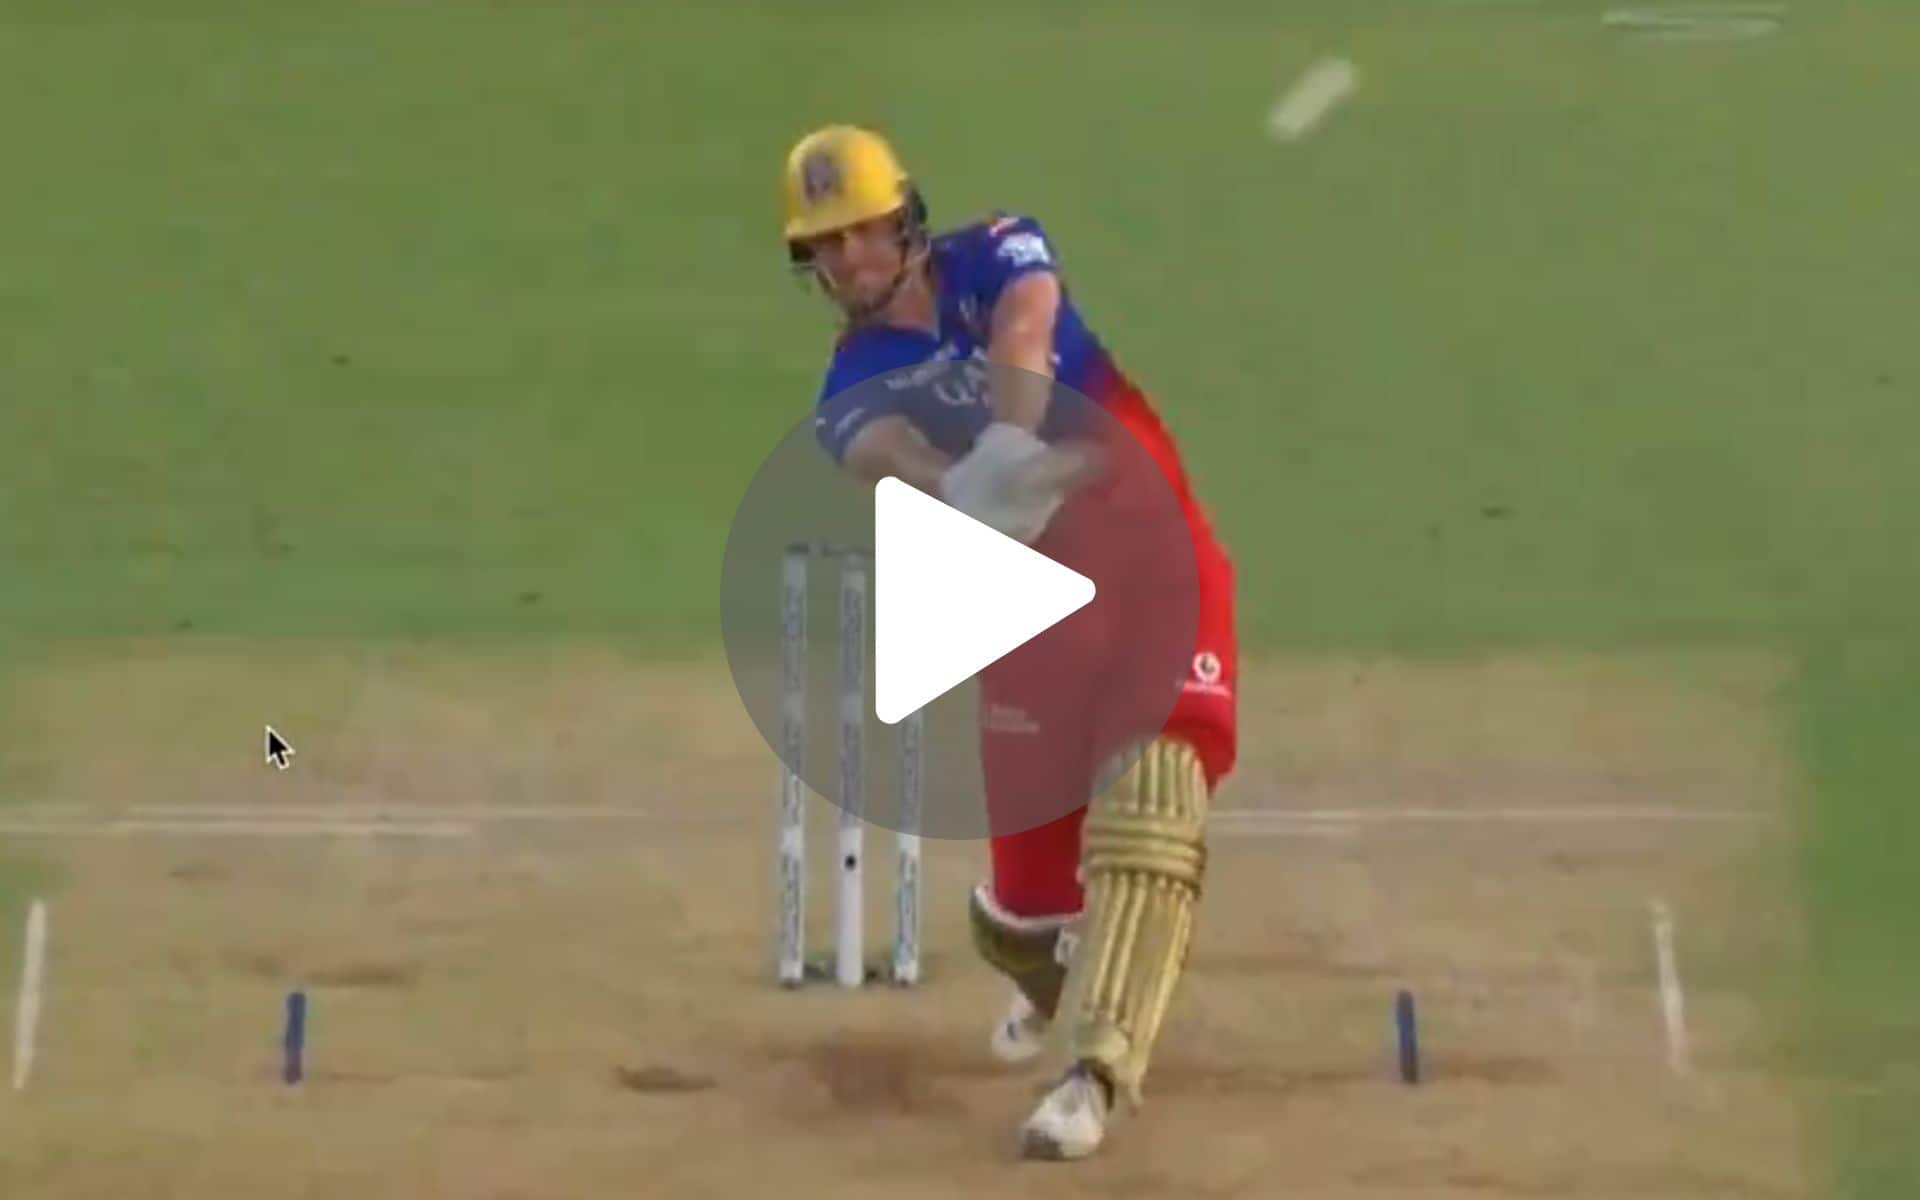 [Watch] 4,6,6NB,6,4 - Will Jacks Goes Wild With Destructive Hitting Against Mohit Sharma
